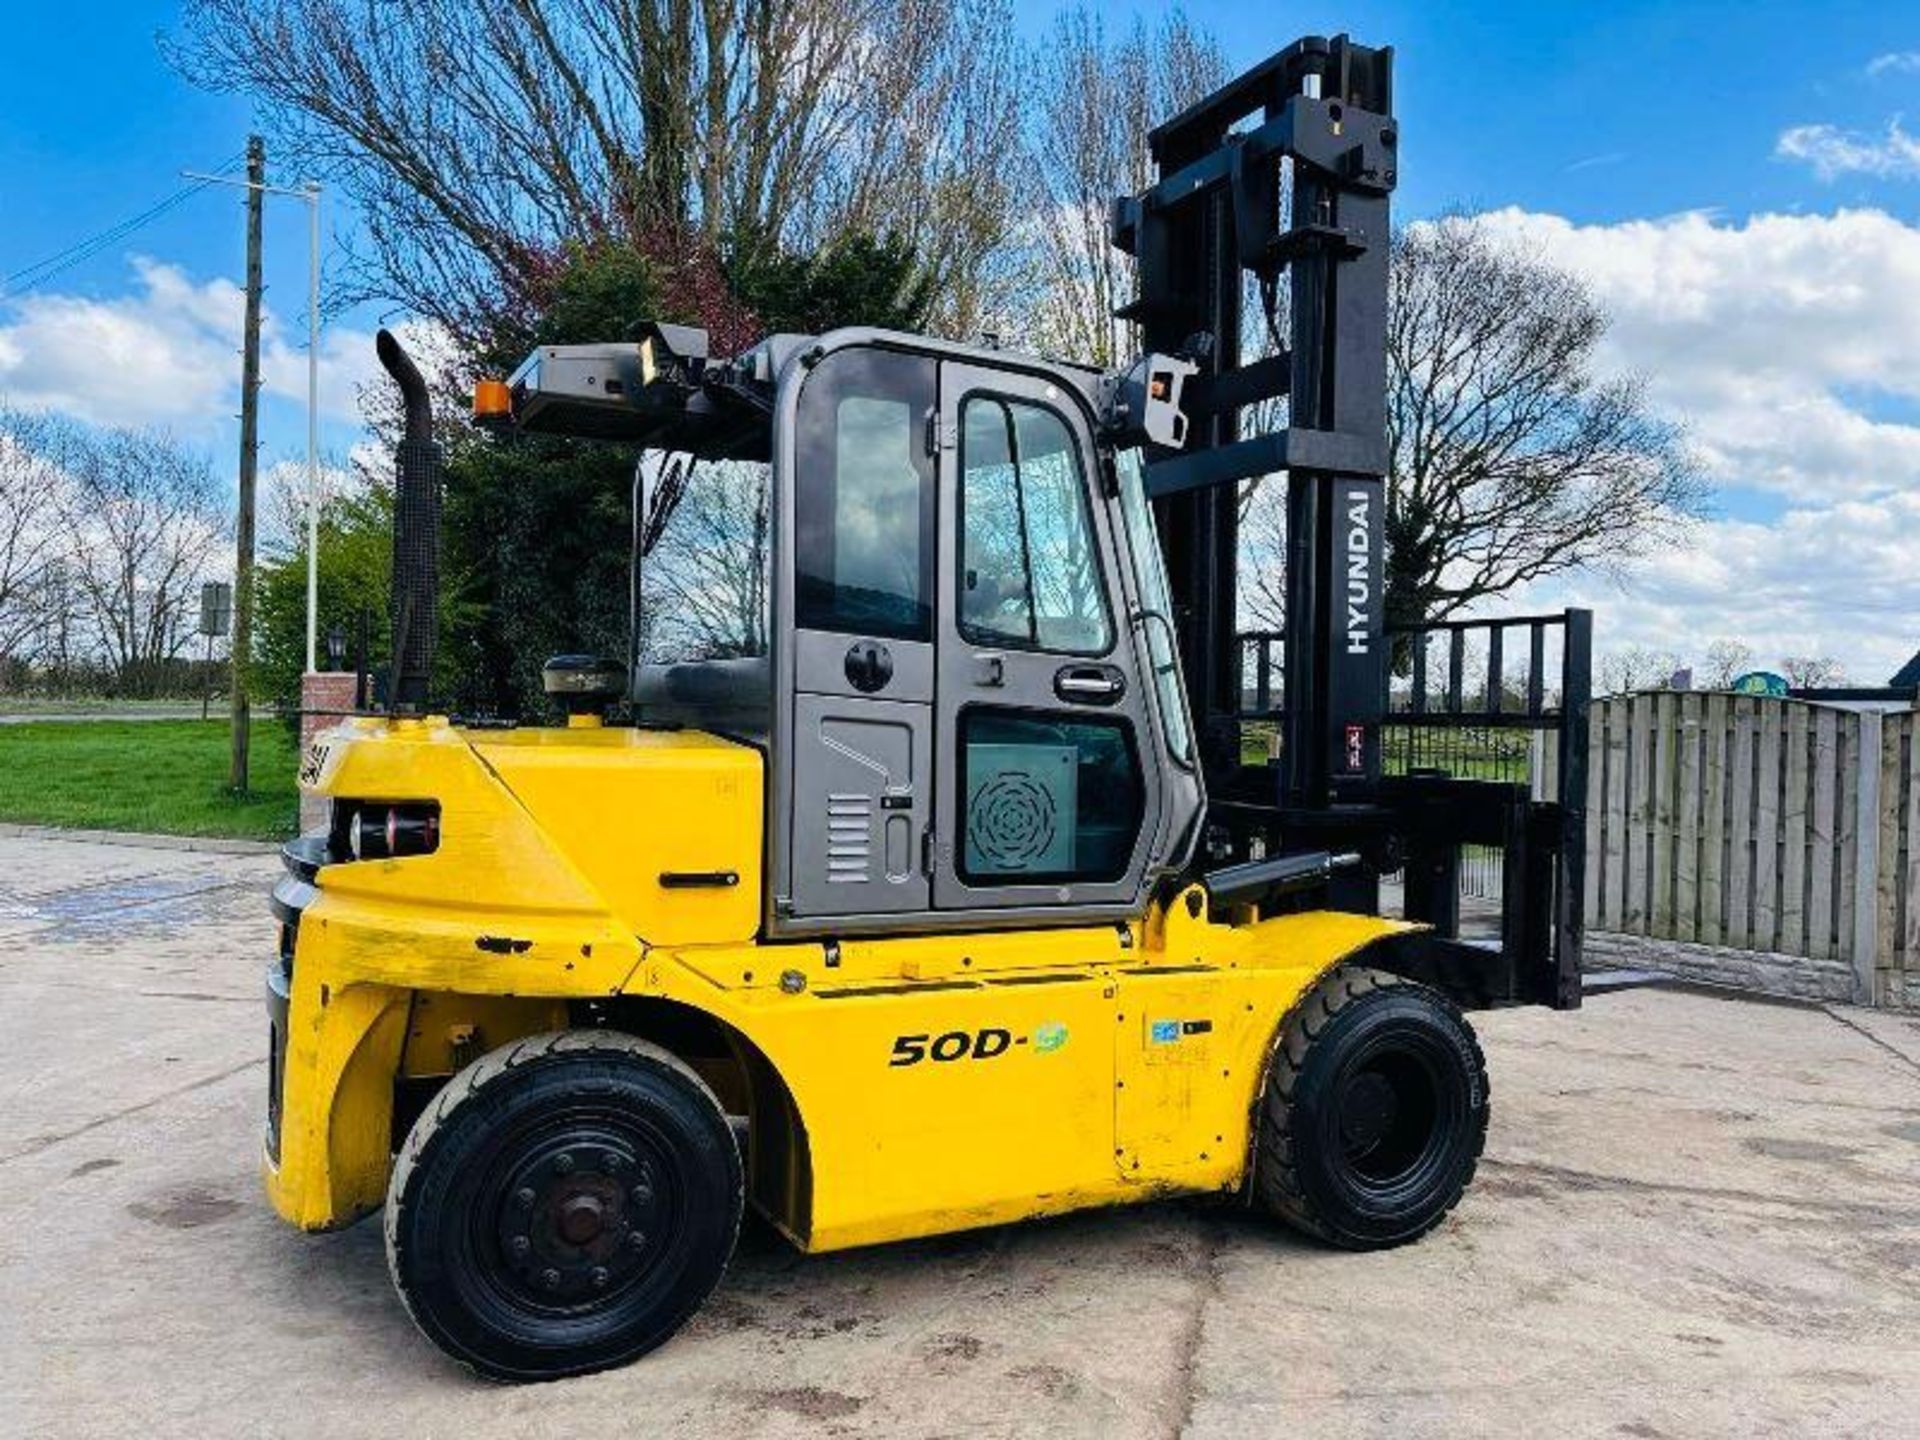 HYUNDAI 50D-9 DIESEL FORKLIFT *YEAR 2016, 5 TON LIFT* C/W SIDE SHIFT - Image 13 of 17